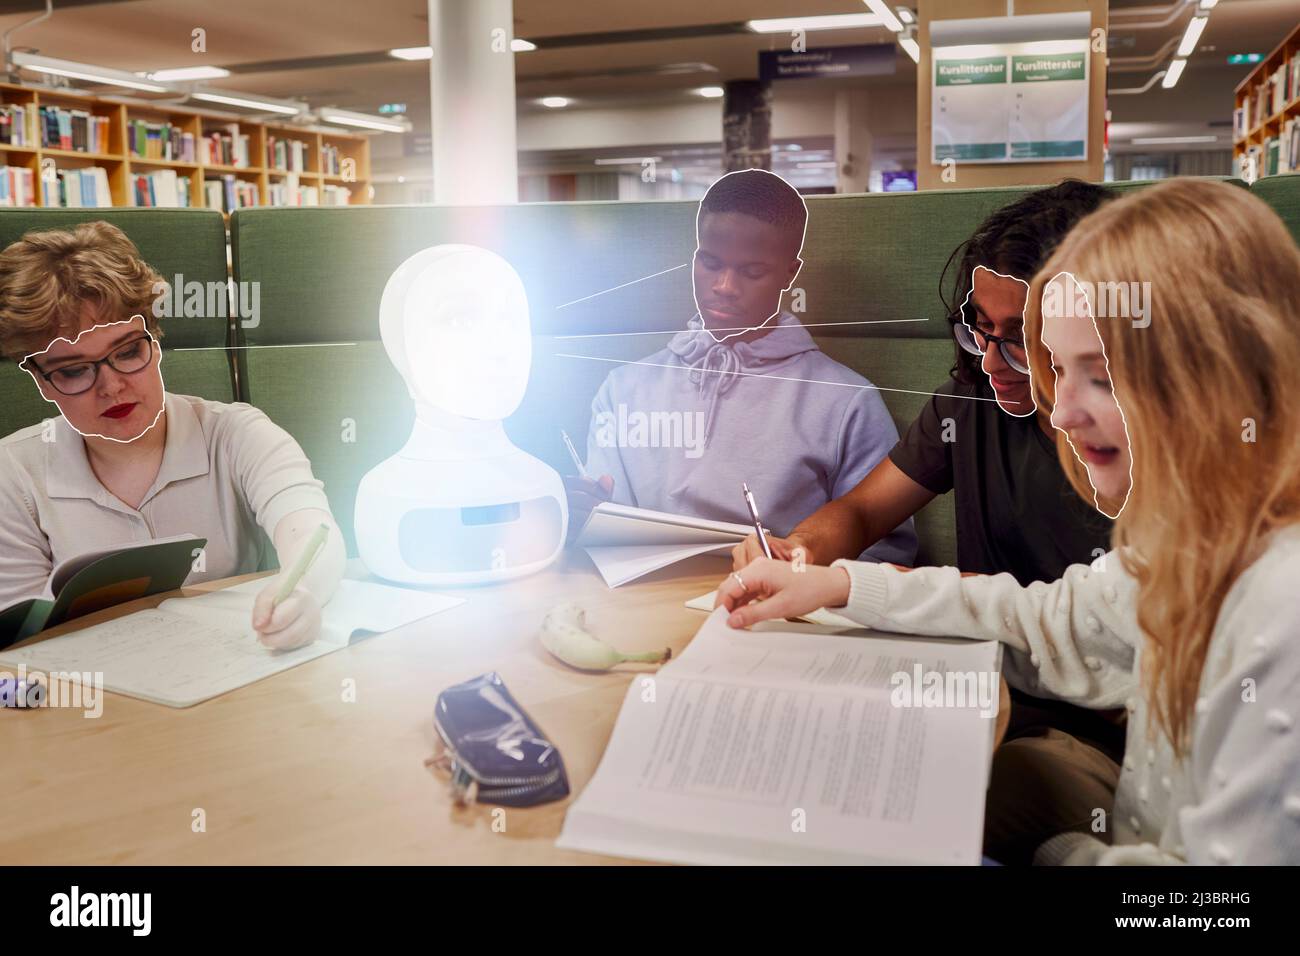 Students studying in library with robotic voice assistant Stock Photo